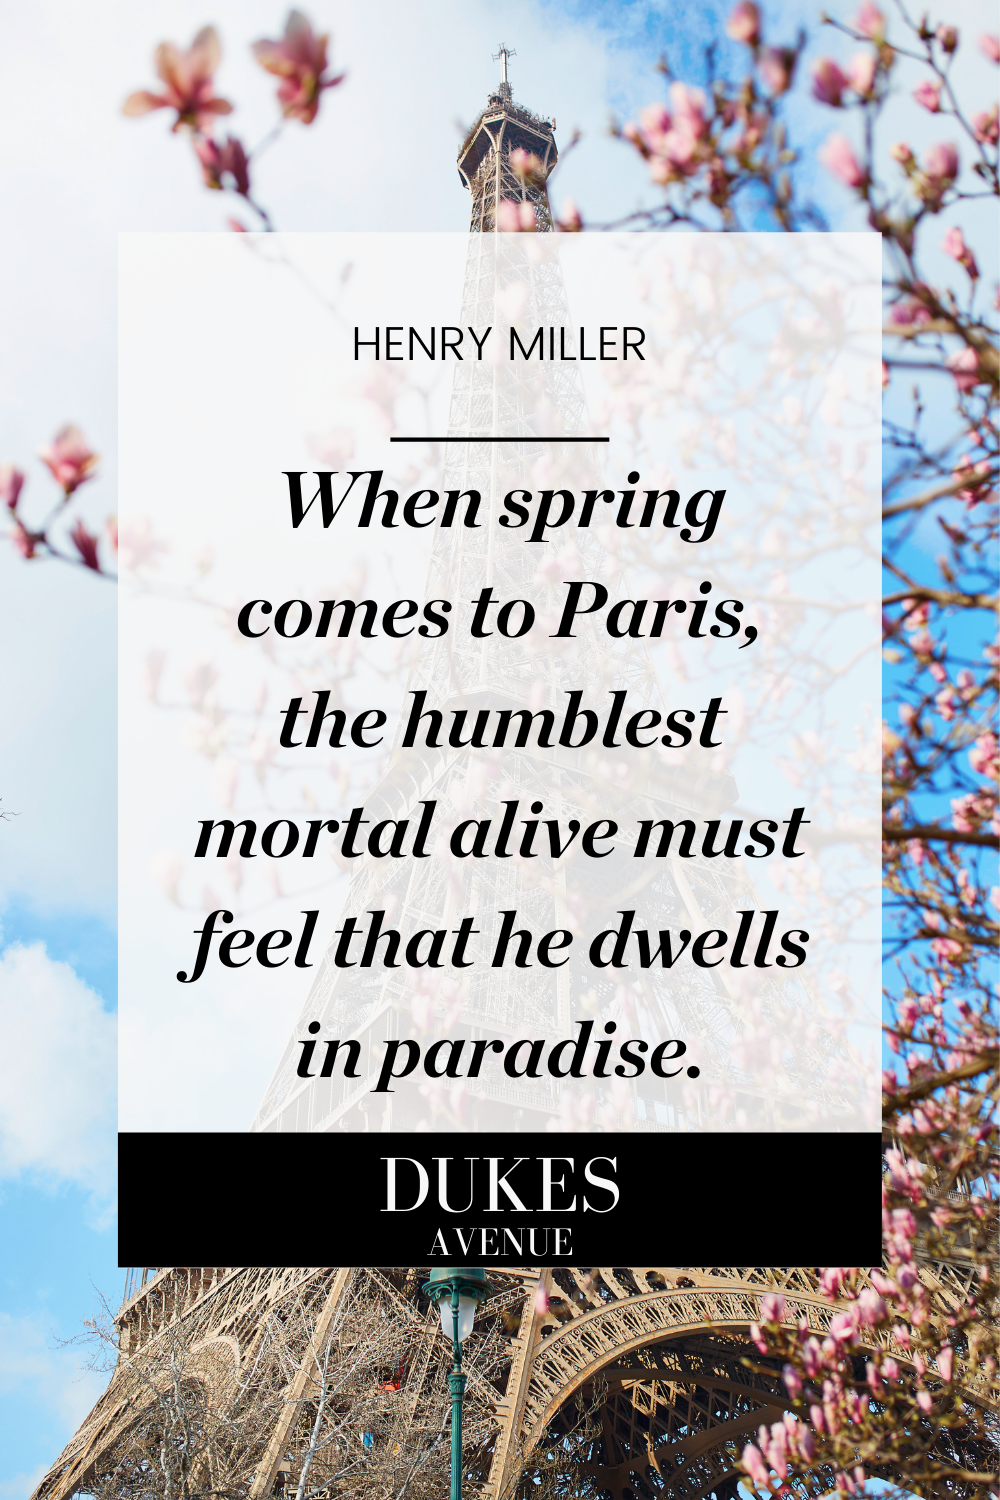 Picture of the Eiffel Tower surrounded by blossoms in the spring, with text overlay of one of Henry Miller's quotes about Paris